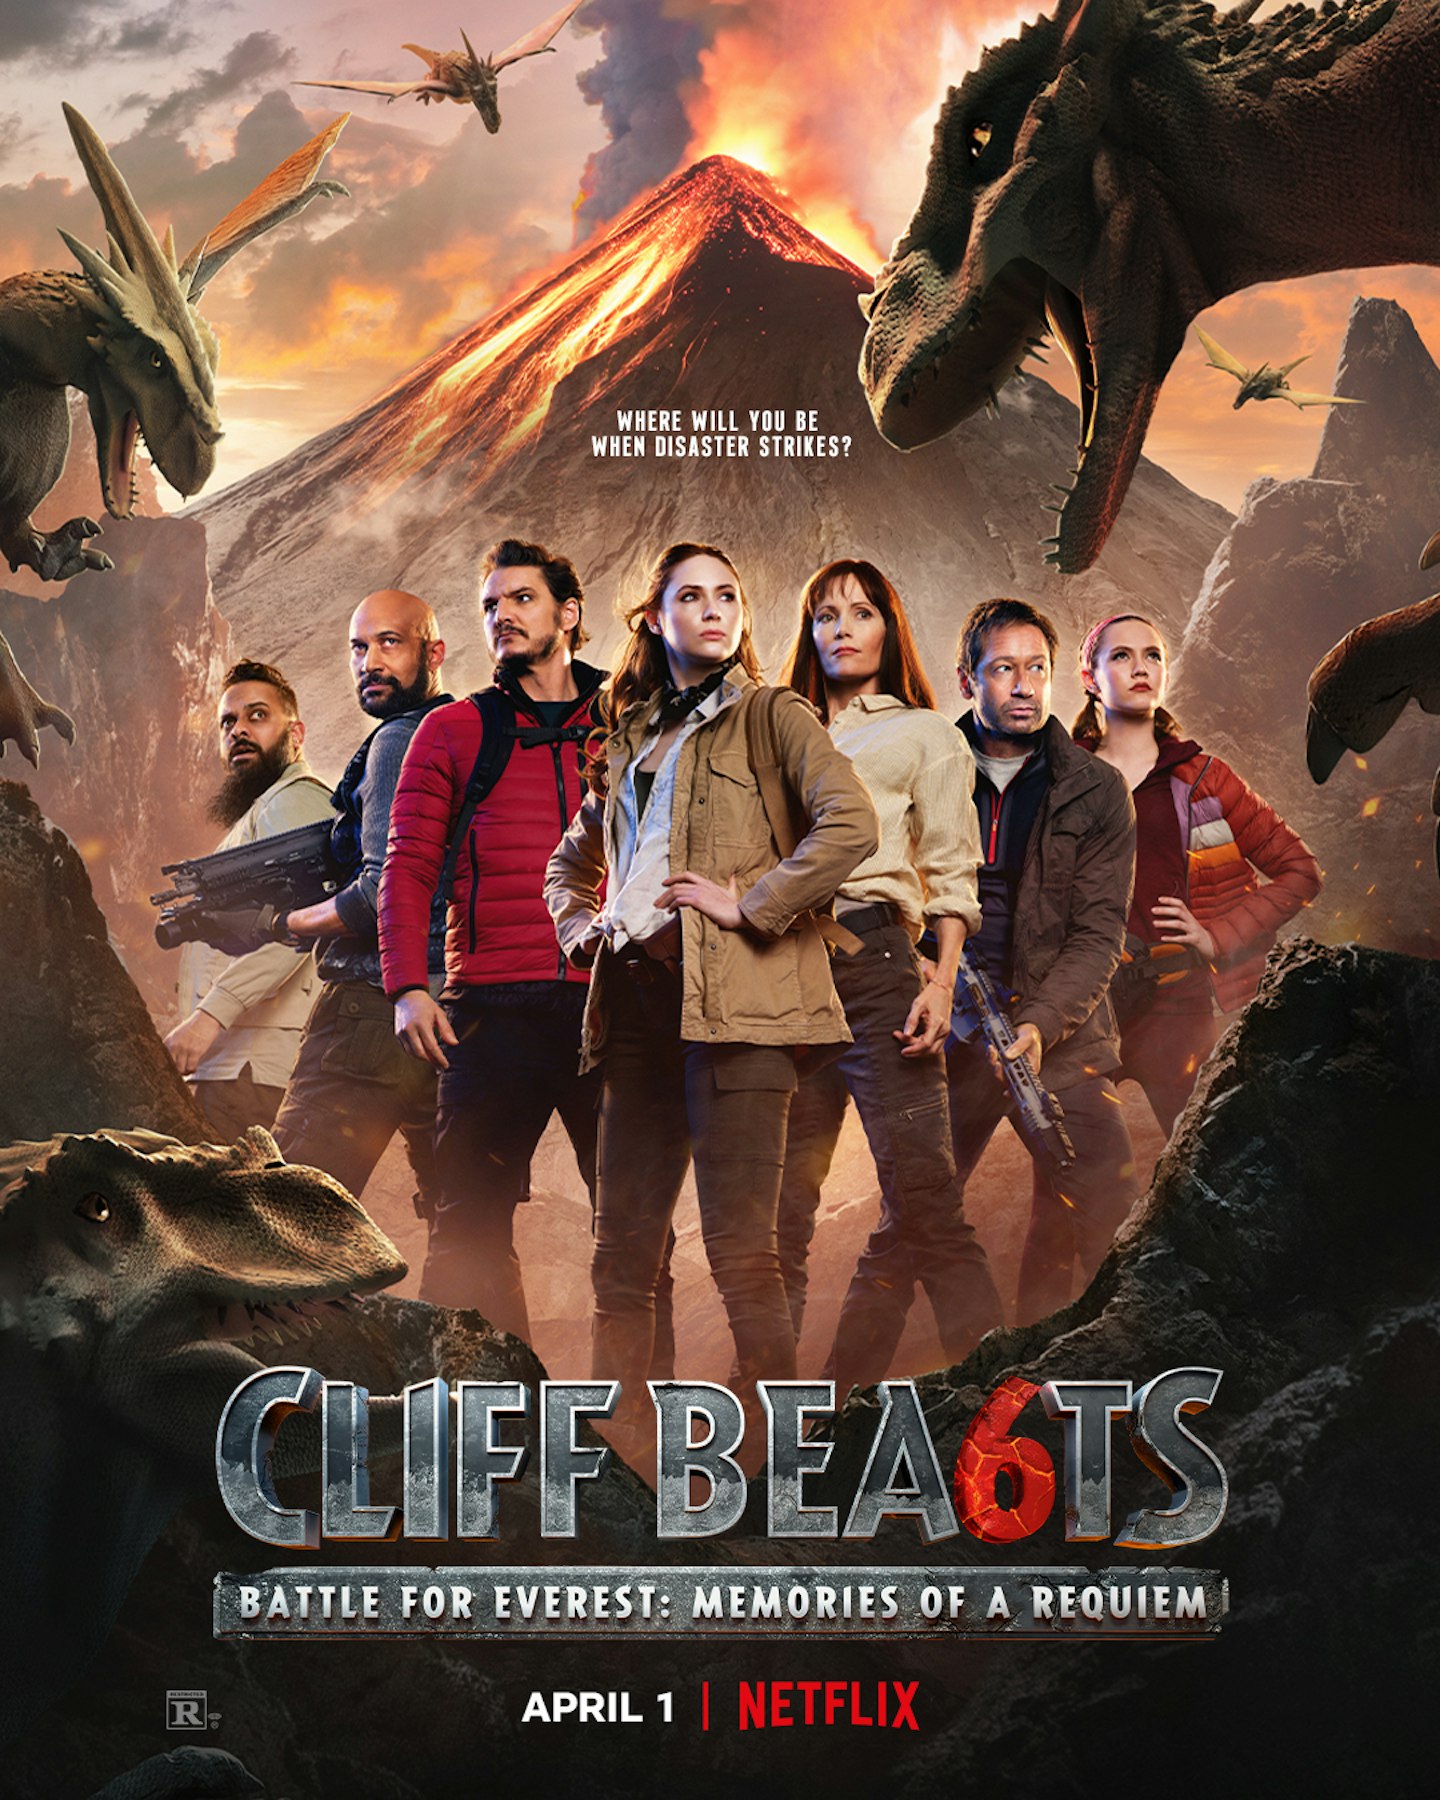 Cliff Beasts 6 trailer